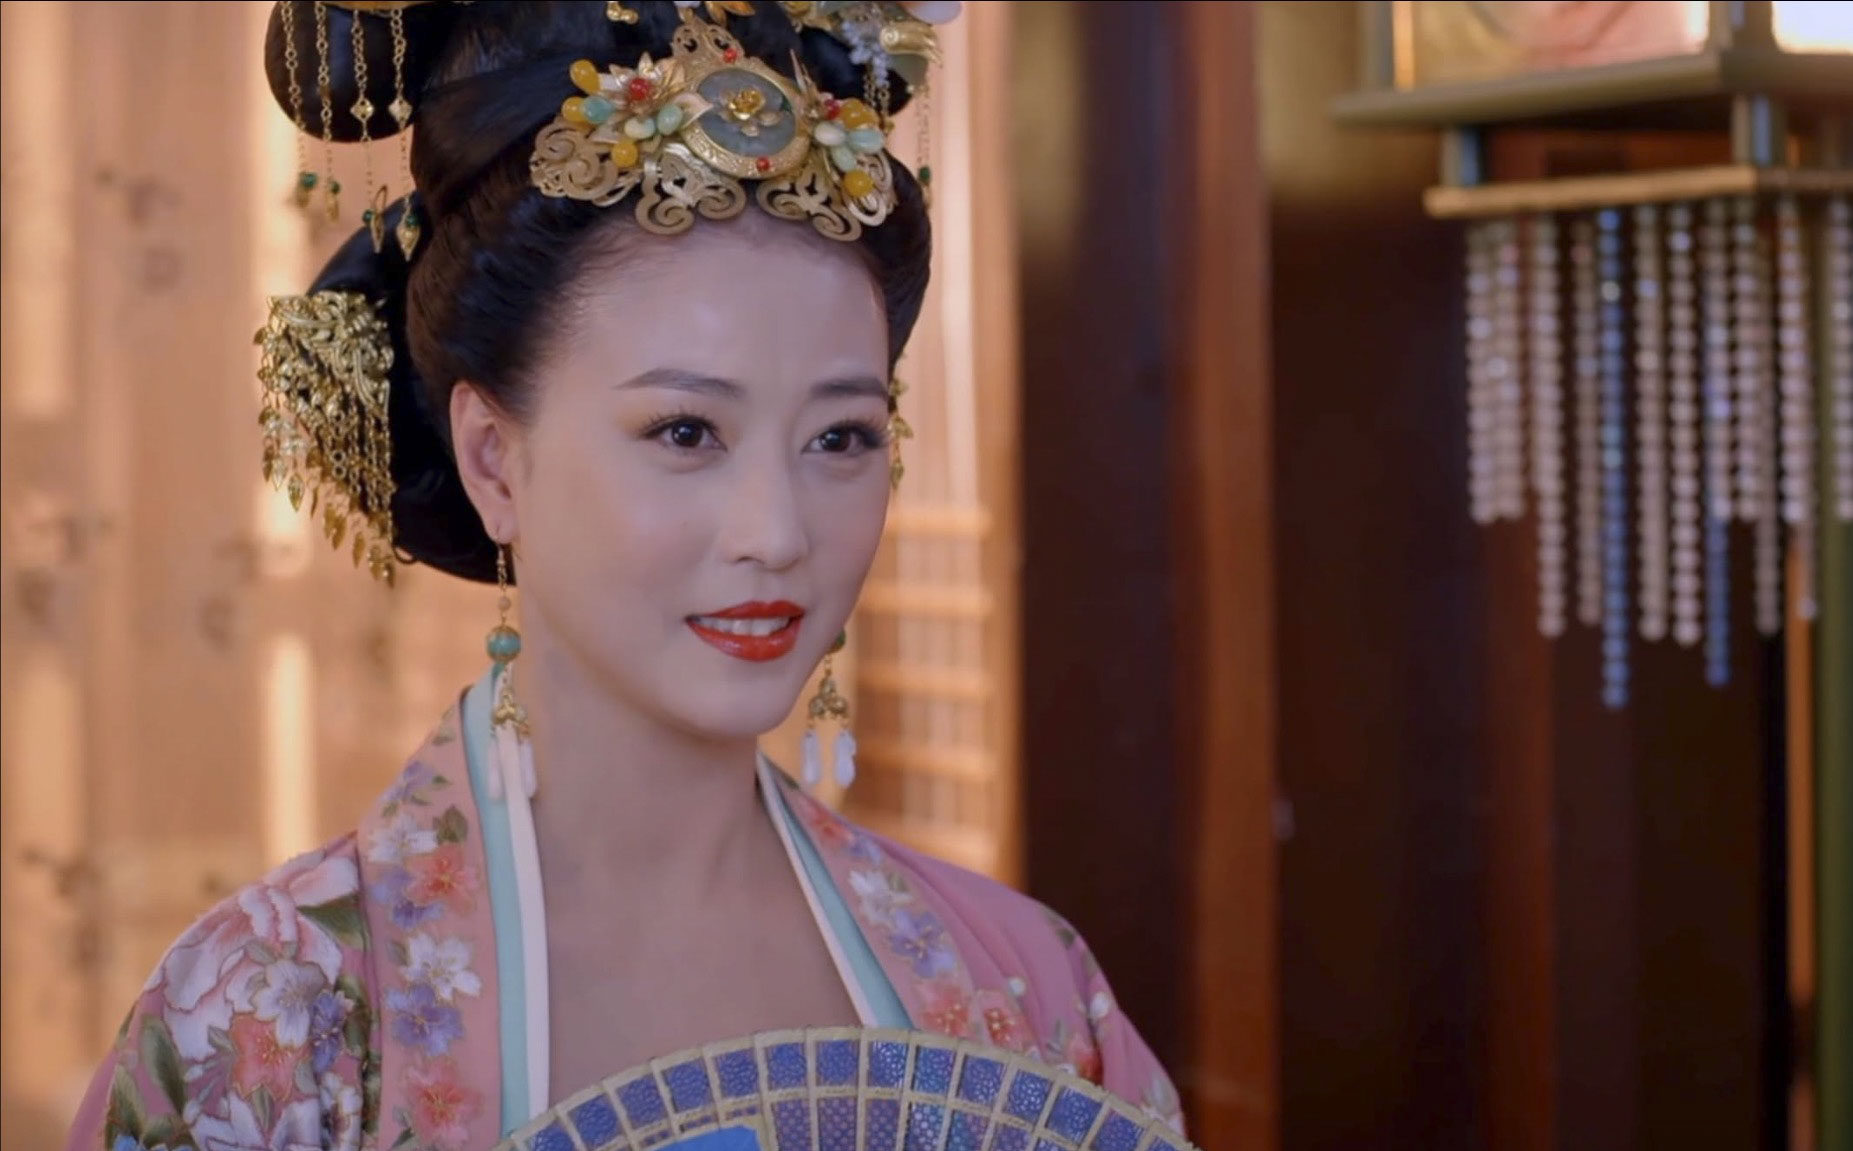 Kathy Chow in The Empress of China (2014). The actress, who appeared in TV series and films in Hong Kong, mainland China and Taiwan, died on December 11 aged 57.